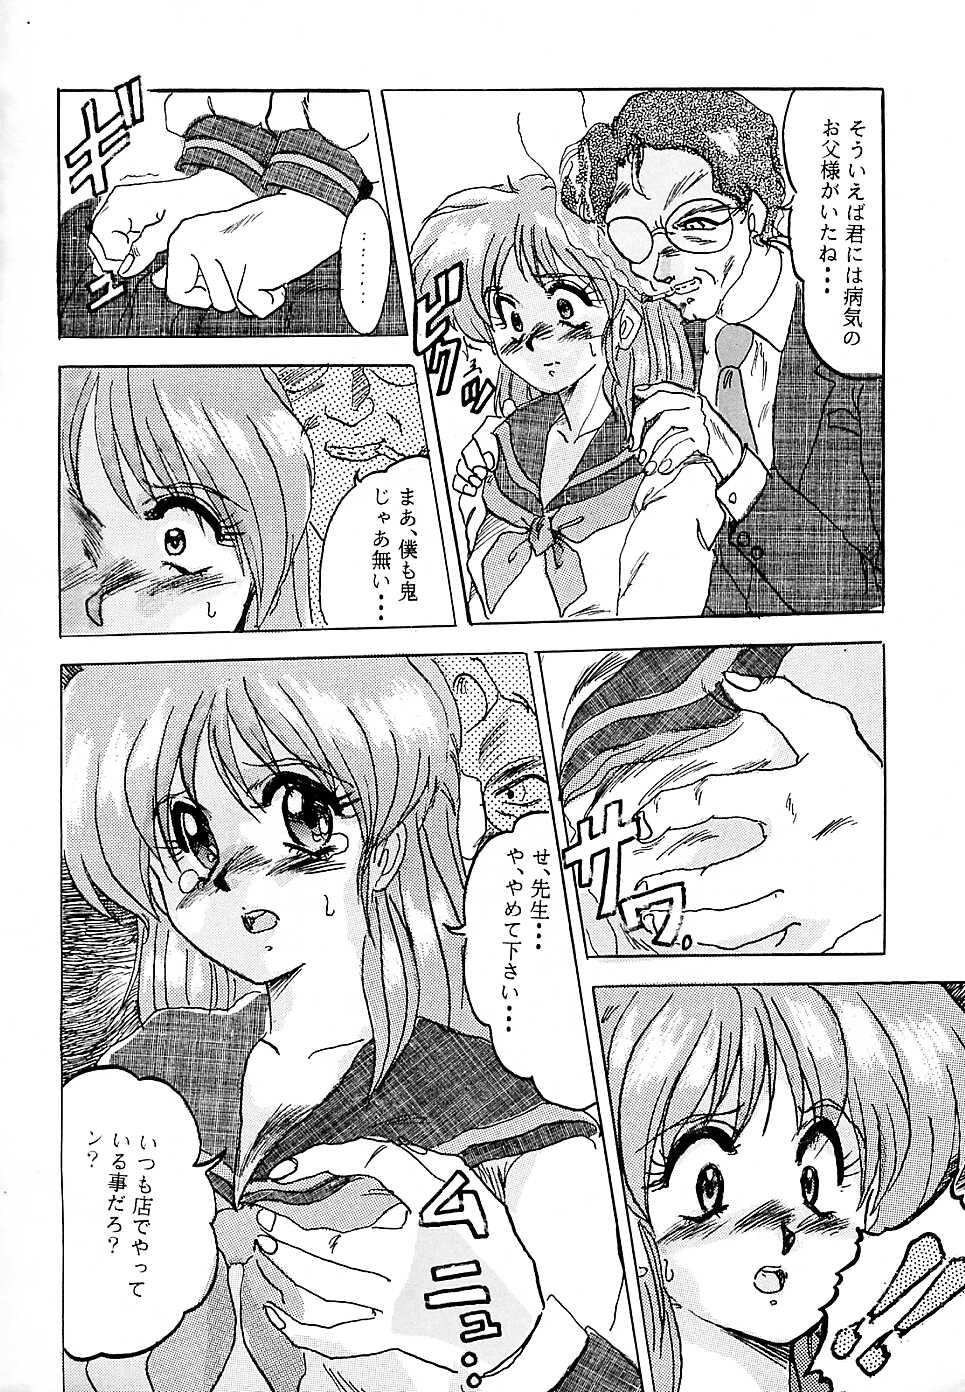 Exotic F 93C - Brave express might gaine Spreadeagle - Page 5